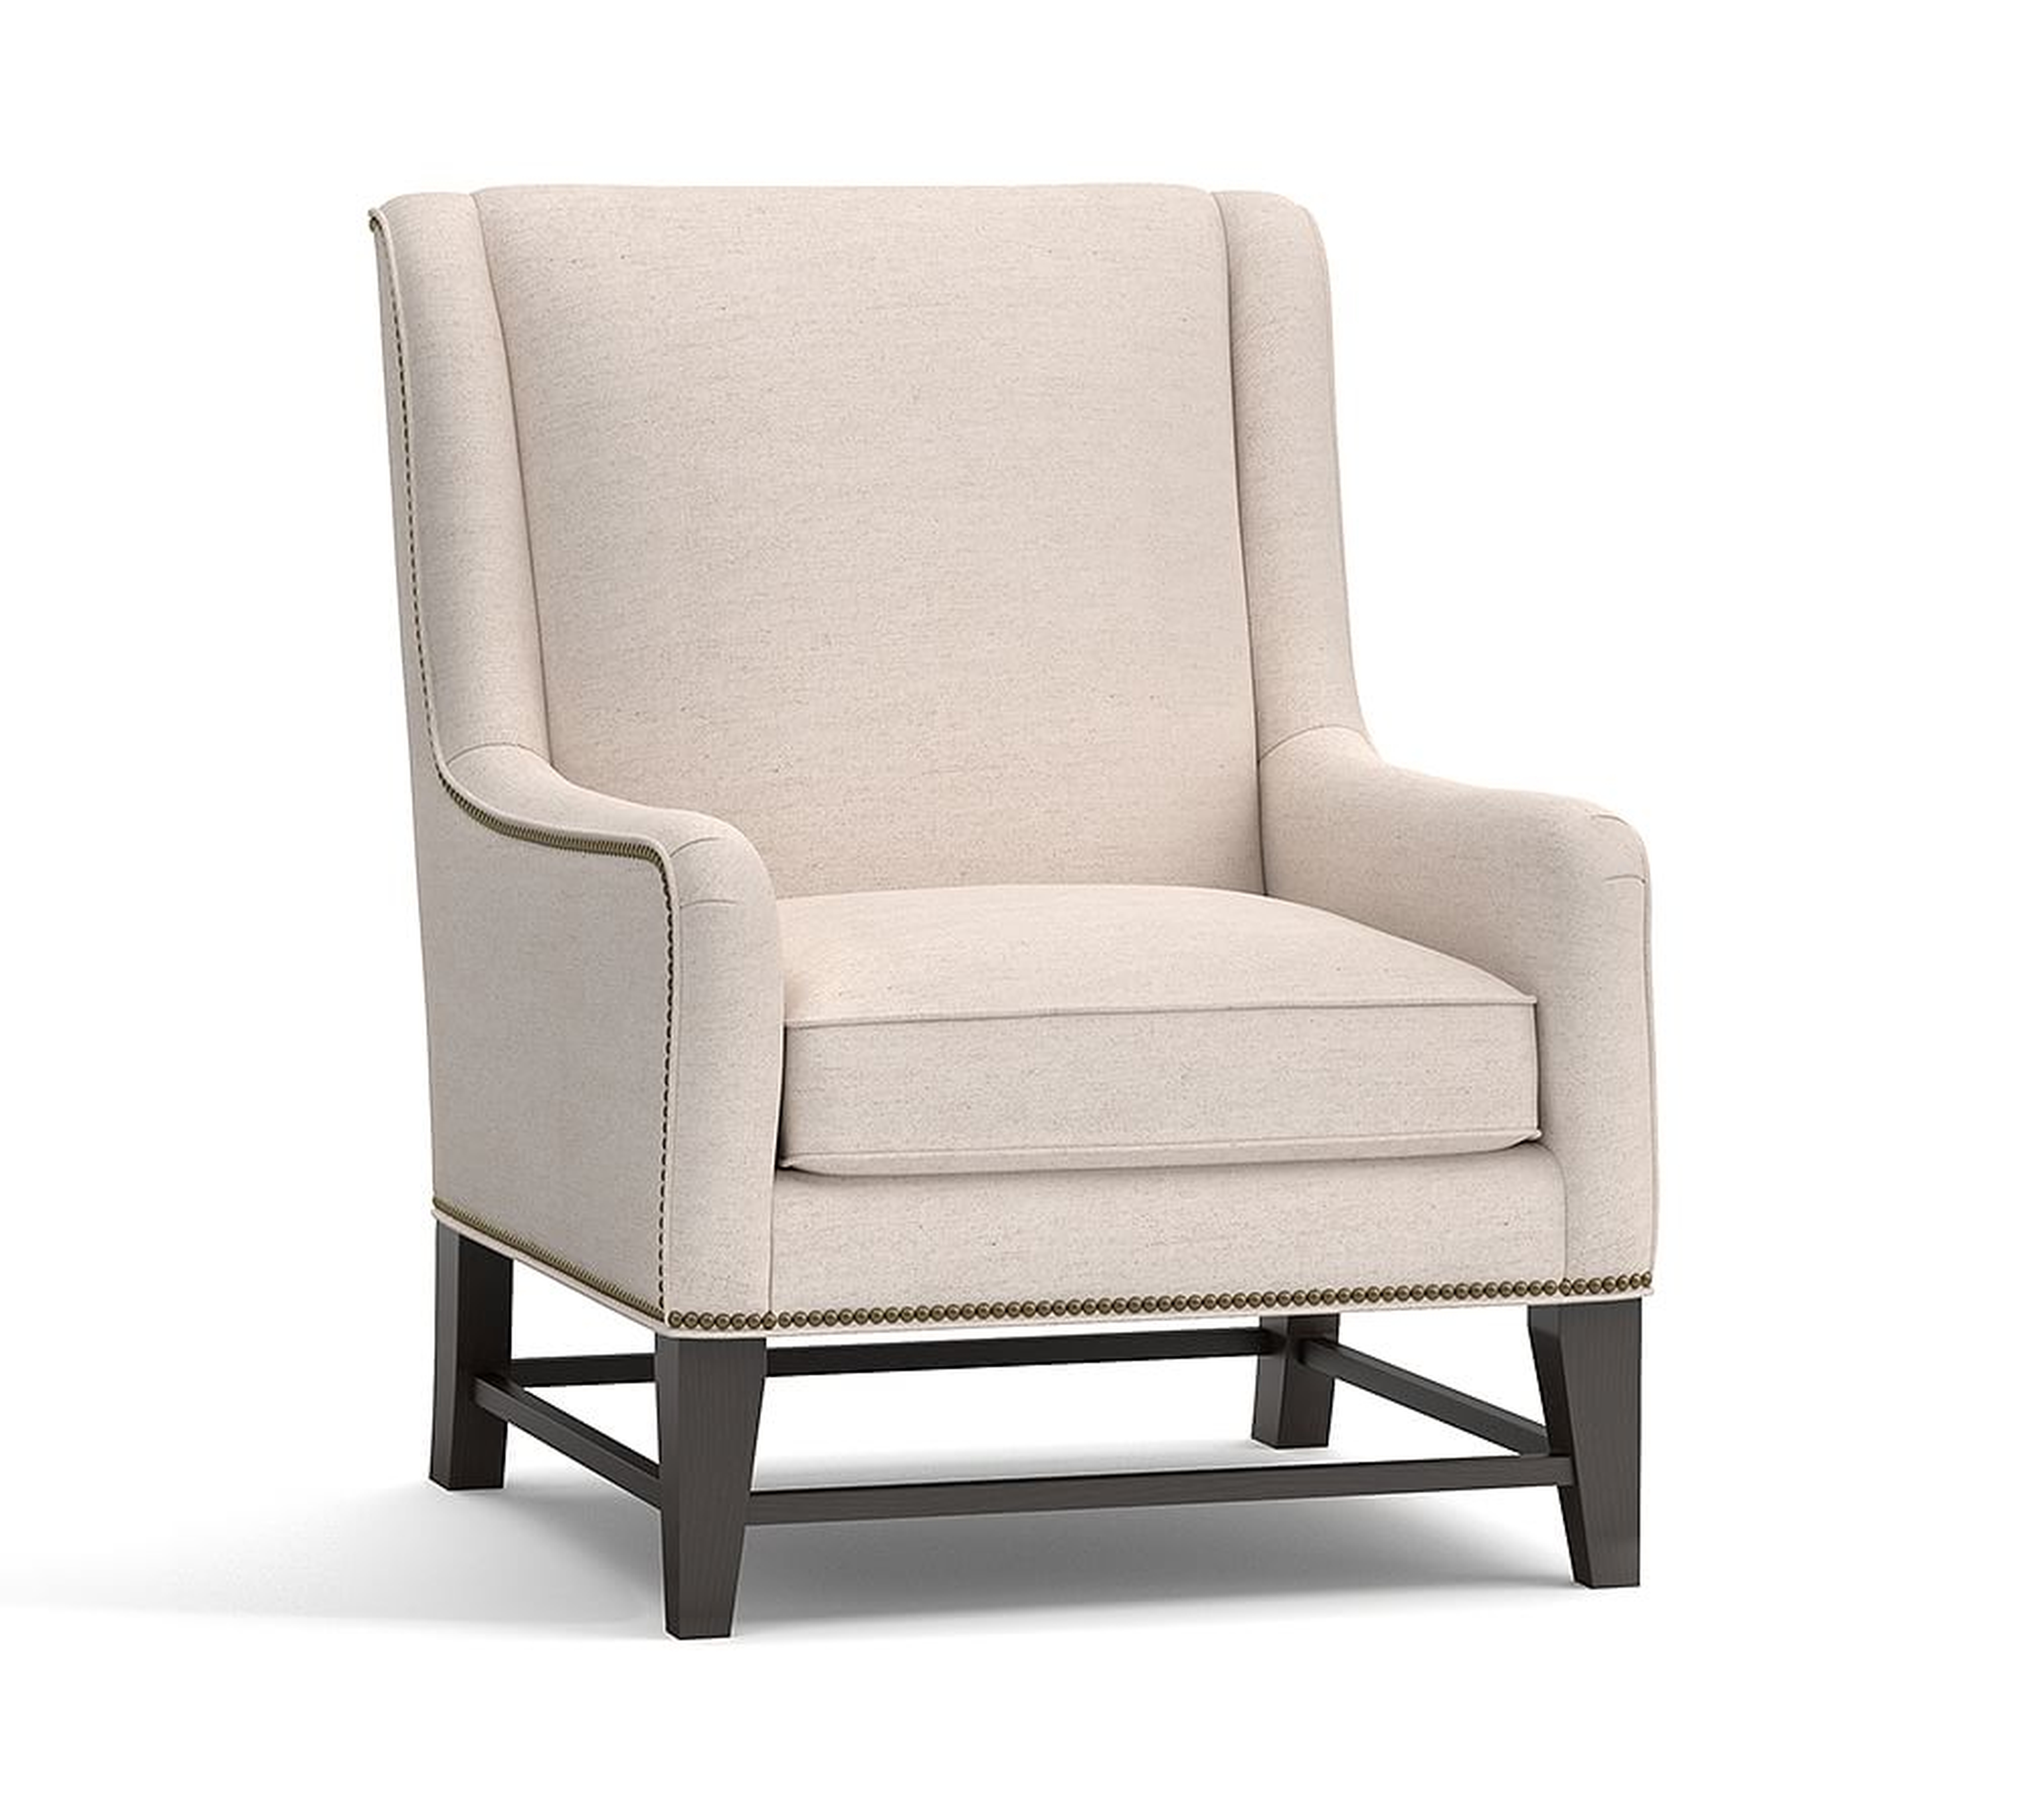 Berkeley Upholstered Armchair, Polyester Wrapped Cushions, Jumbo Basketweave Ivory - Pottery Barn